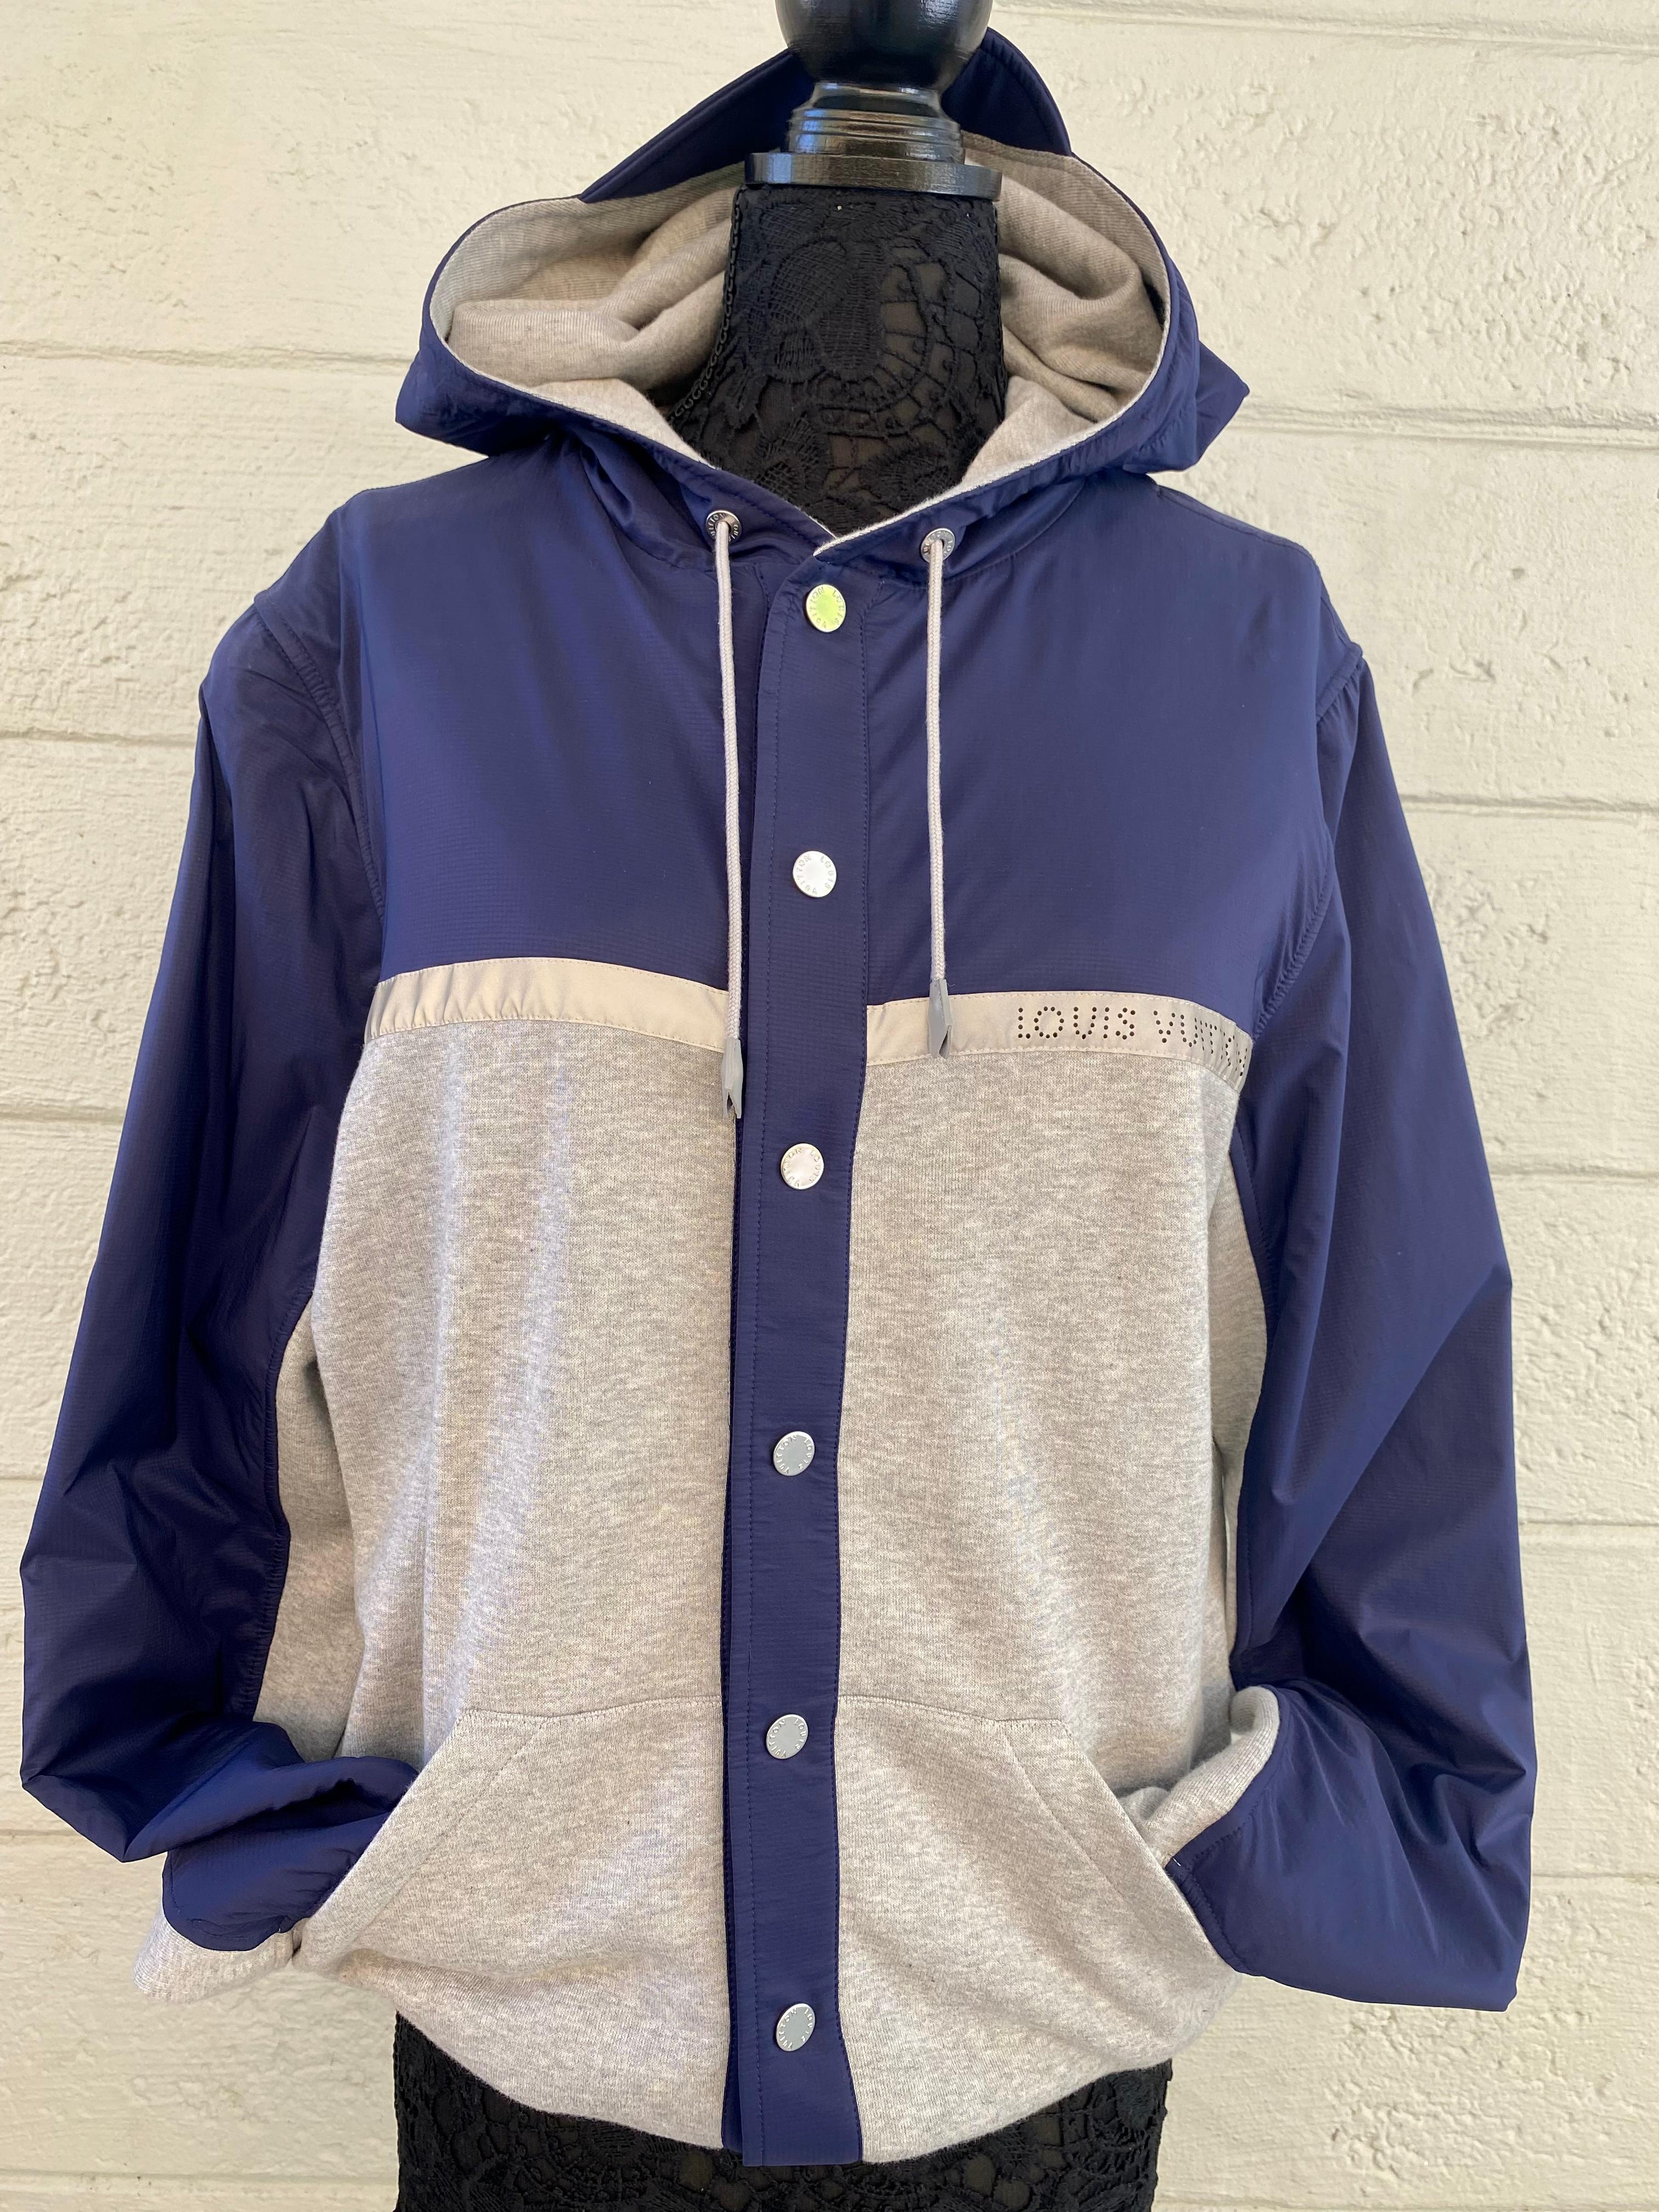 Tailored from a comfortable technical cotton jersey, this iconic button up travel hoodie features a metallic silver reflective Louis Vuitton logo perforated signature. Beautiful navy blue and gray color combination. 
This Louis Vuitton jacket is the